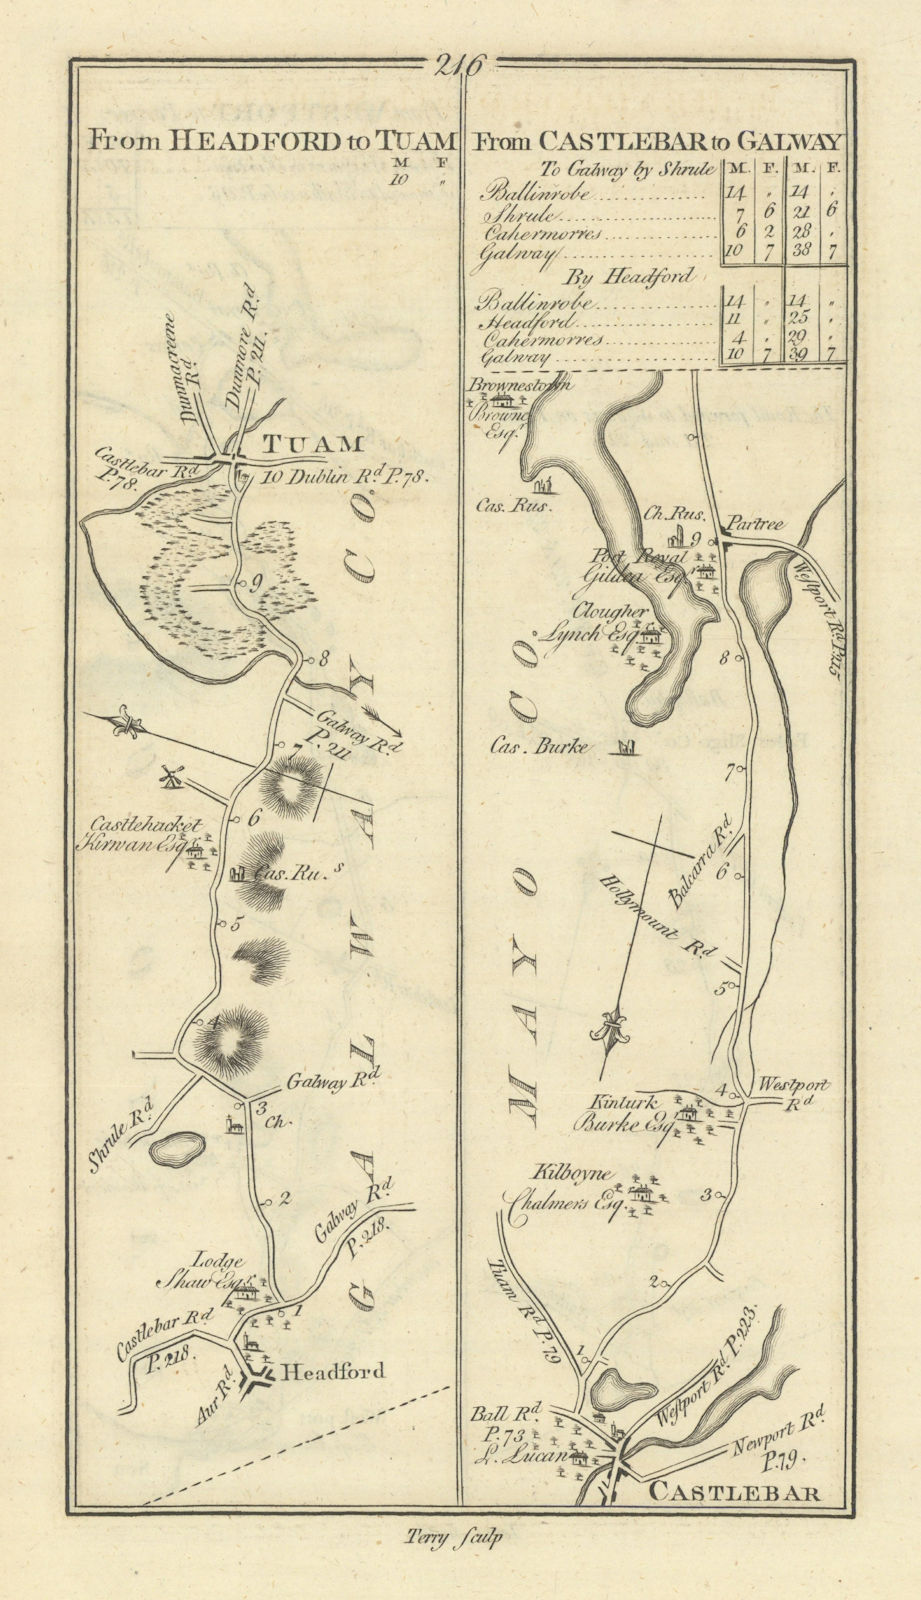 #216 Headford to Tuam. Castlebar to Galway. Partry Mayo. TAYLOR/SKINNER 1778 map